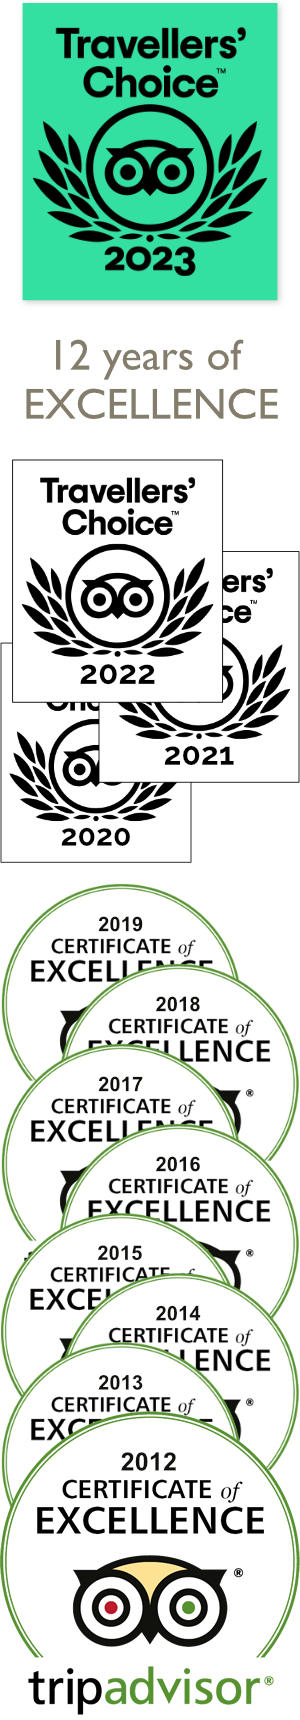 Certificates of Excellence 2012 - 2023